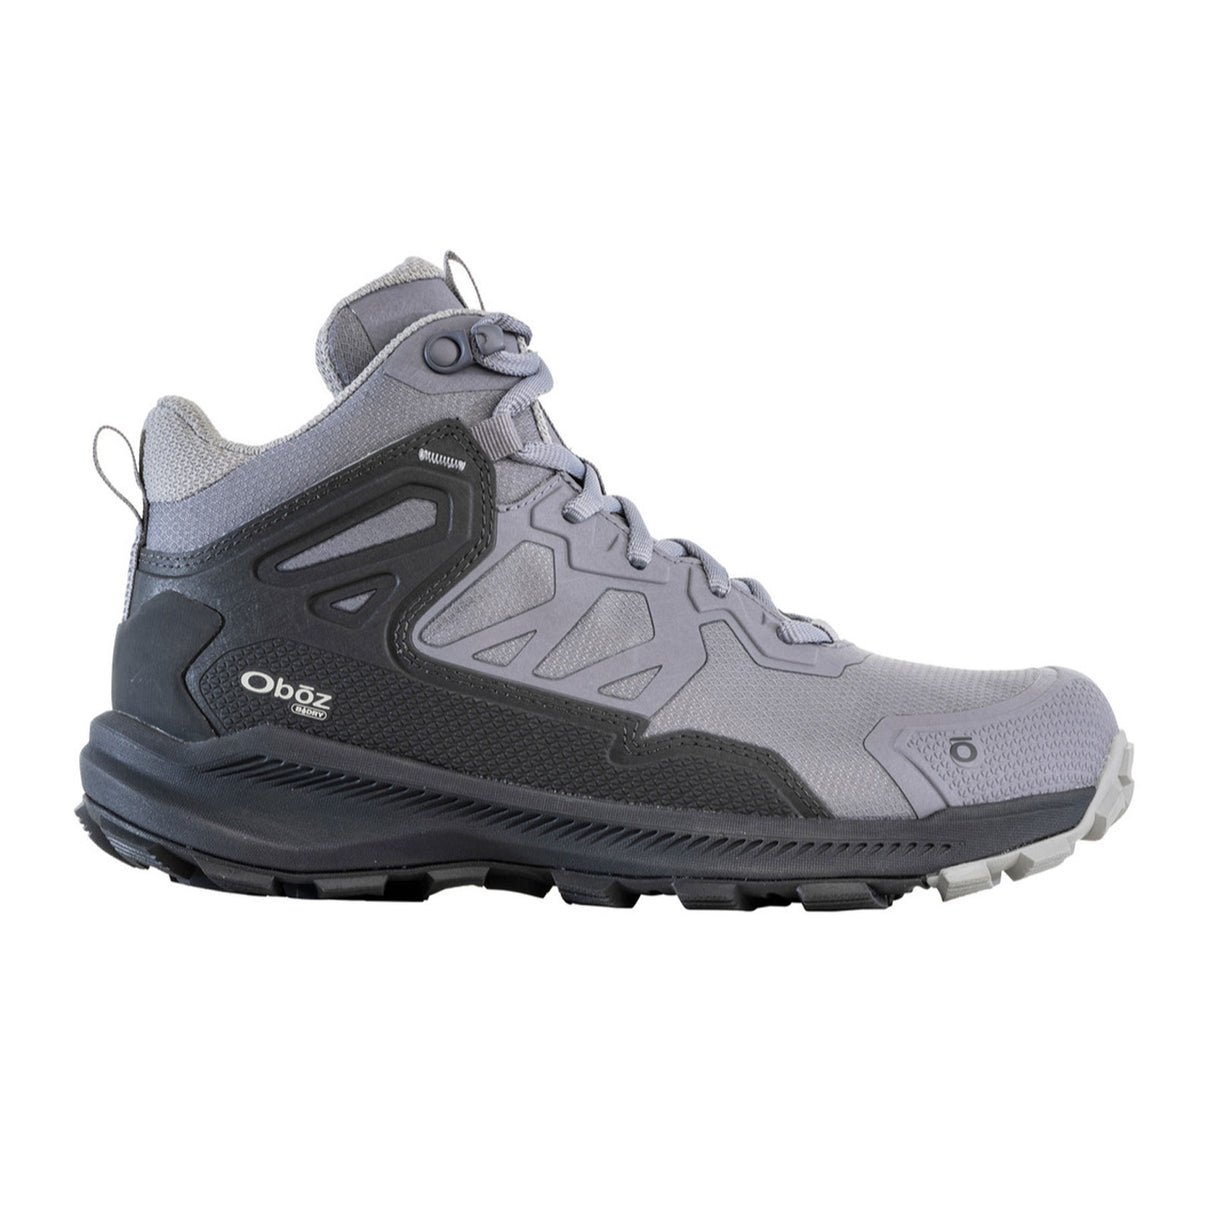 Oboz Katabatic Mid B-DRY Hiking Boot (Women) - Mineral Hiking - Mid - The Heel Shoe Fitters